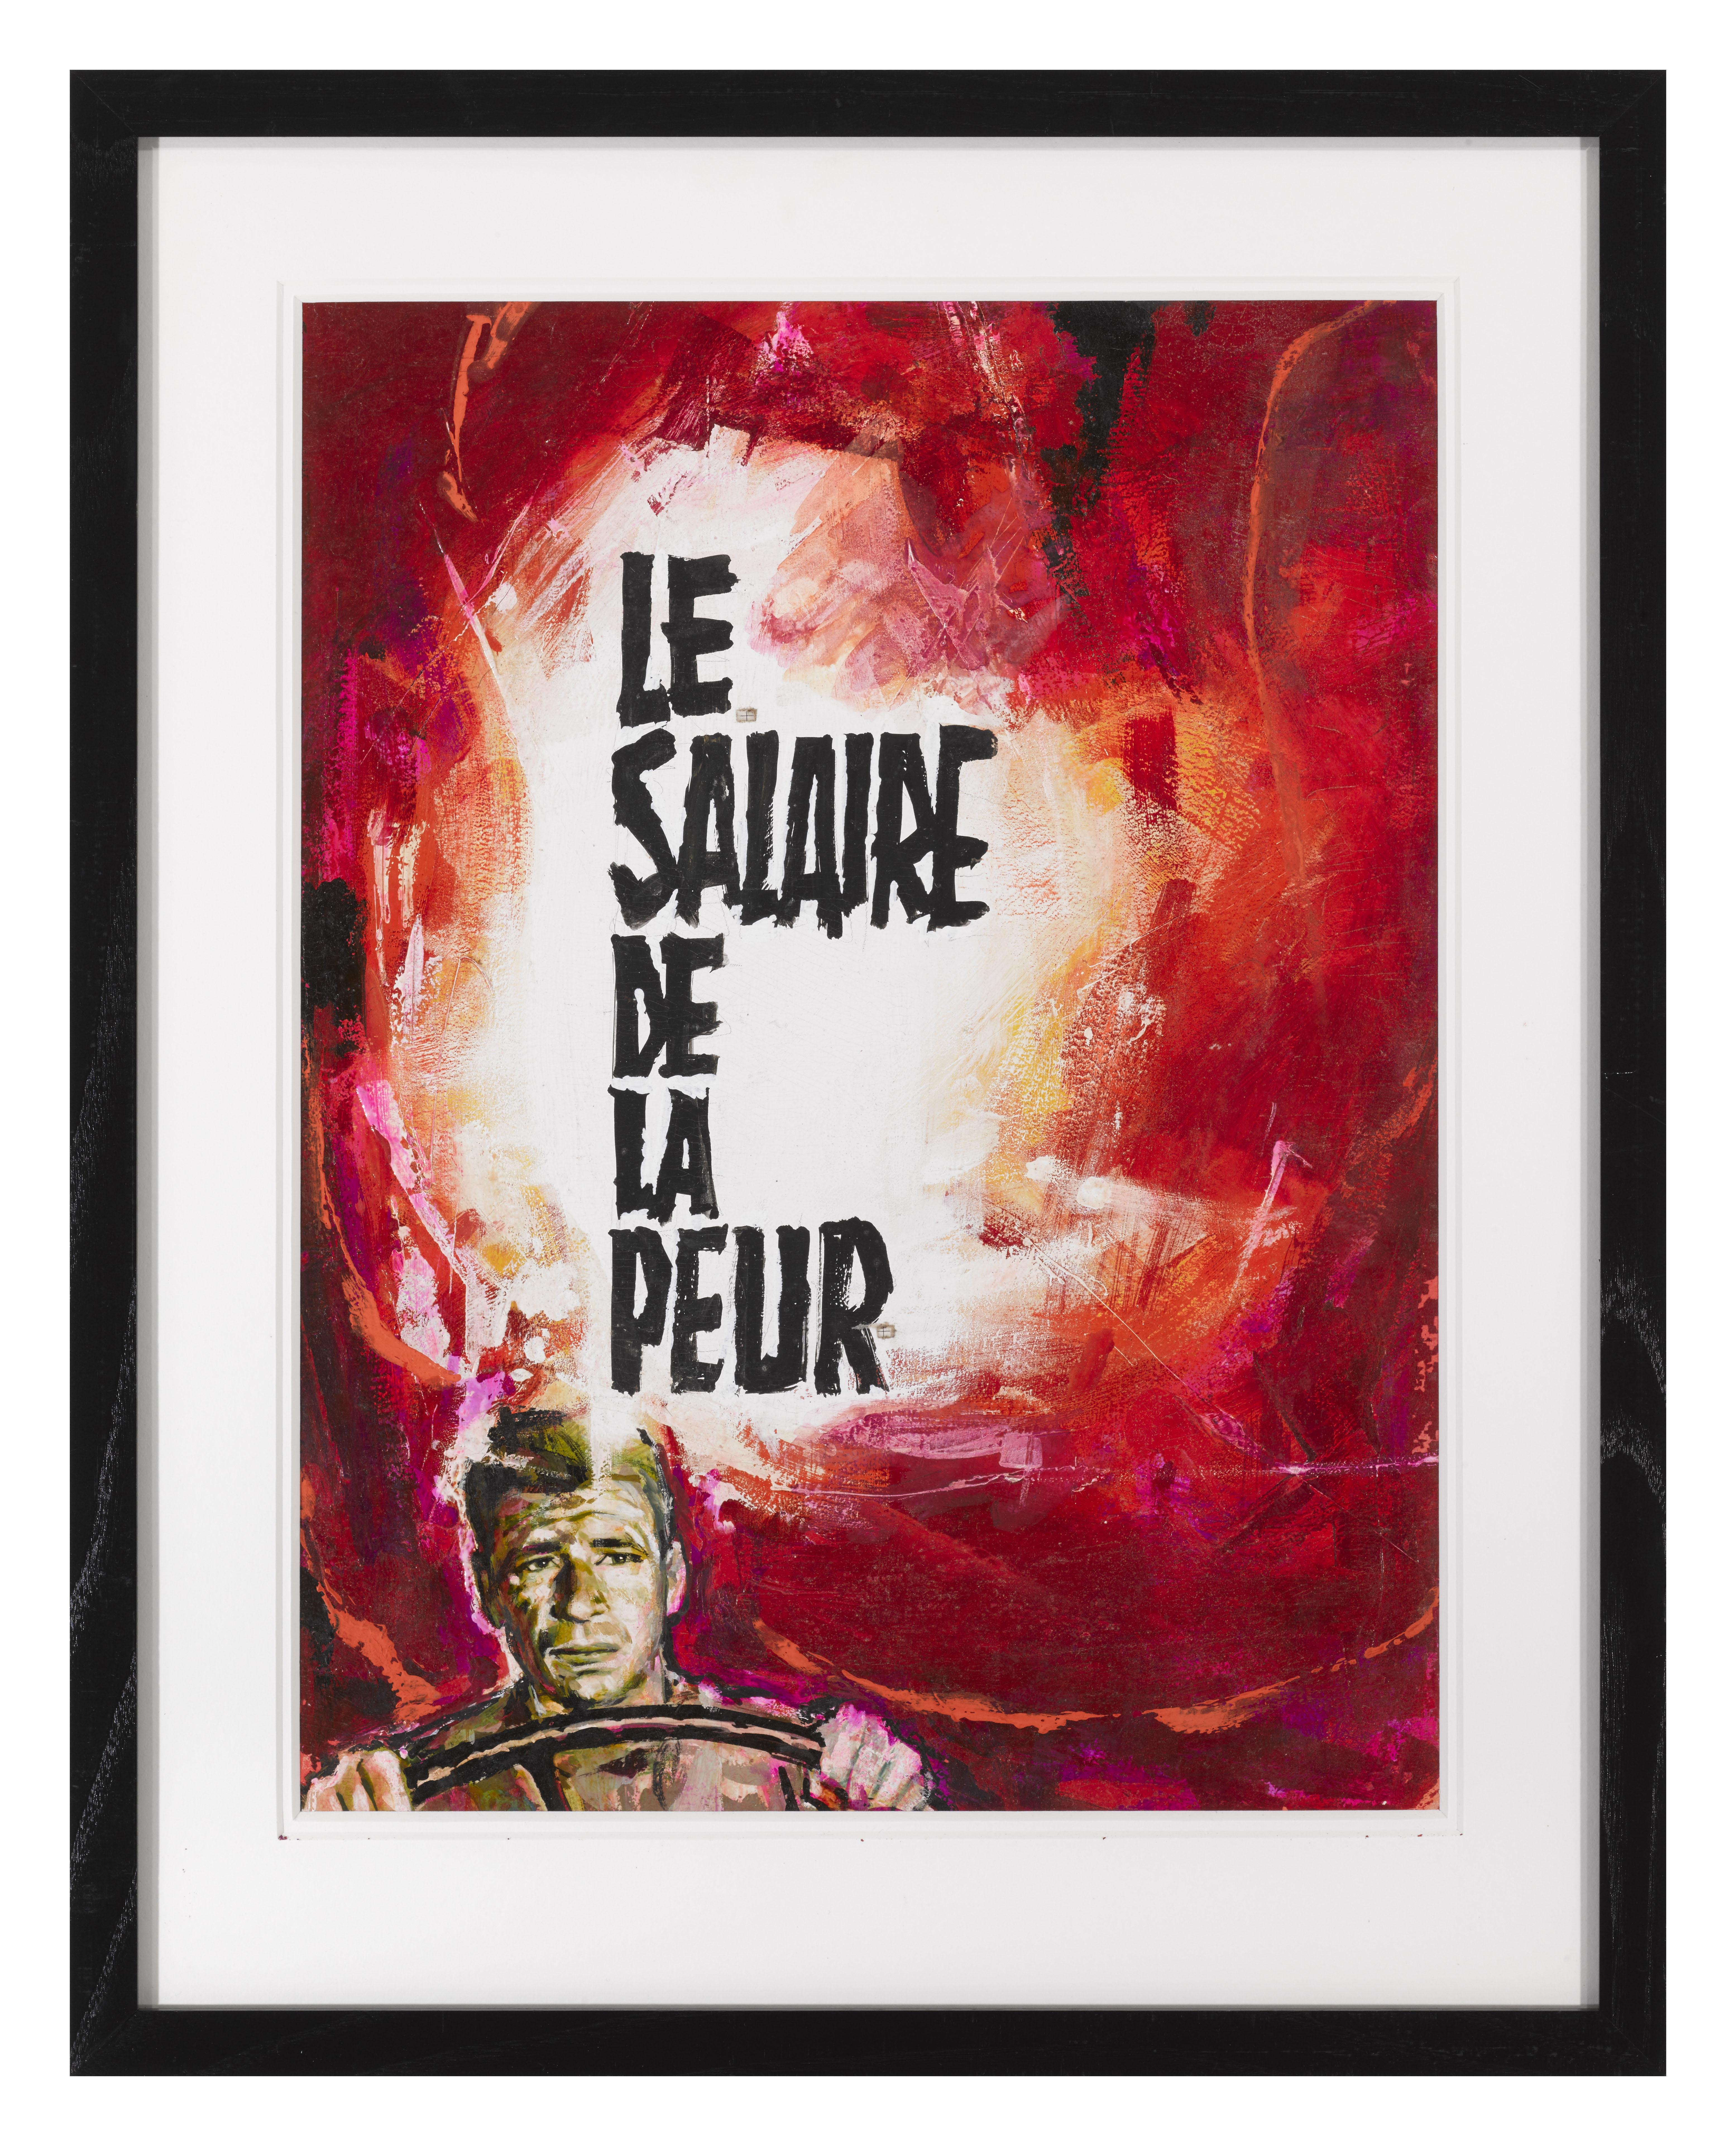 Original French artwork used to create the French 31 x 24 inch film poster for the films 1960's re-release of the 1953 adventure thriller film Le Salaire de la Peur / The Wages of Fear.
This film was directed by Henri-Georges Clouzot. Yves Montand,